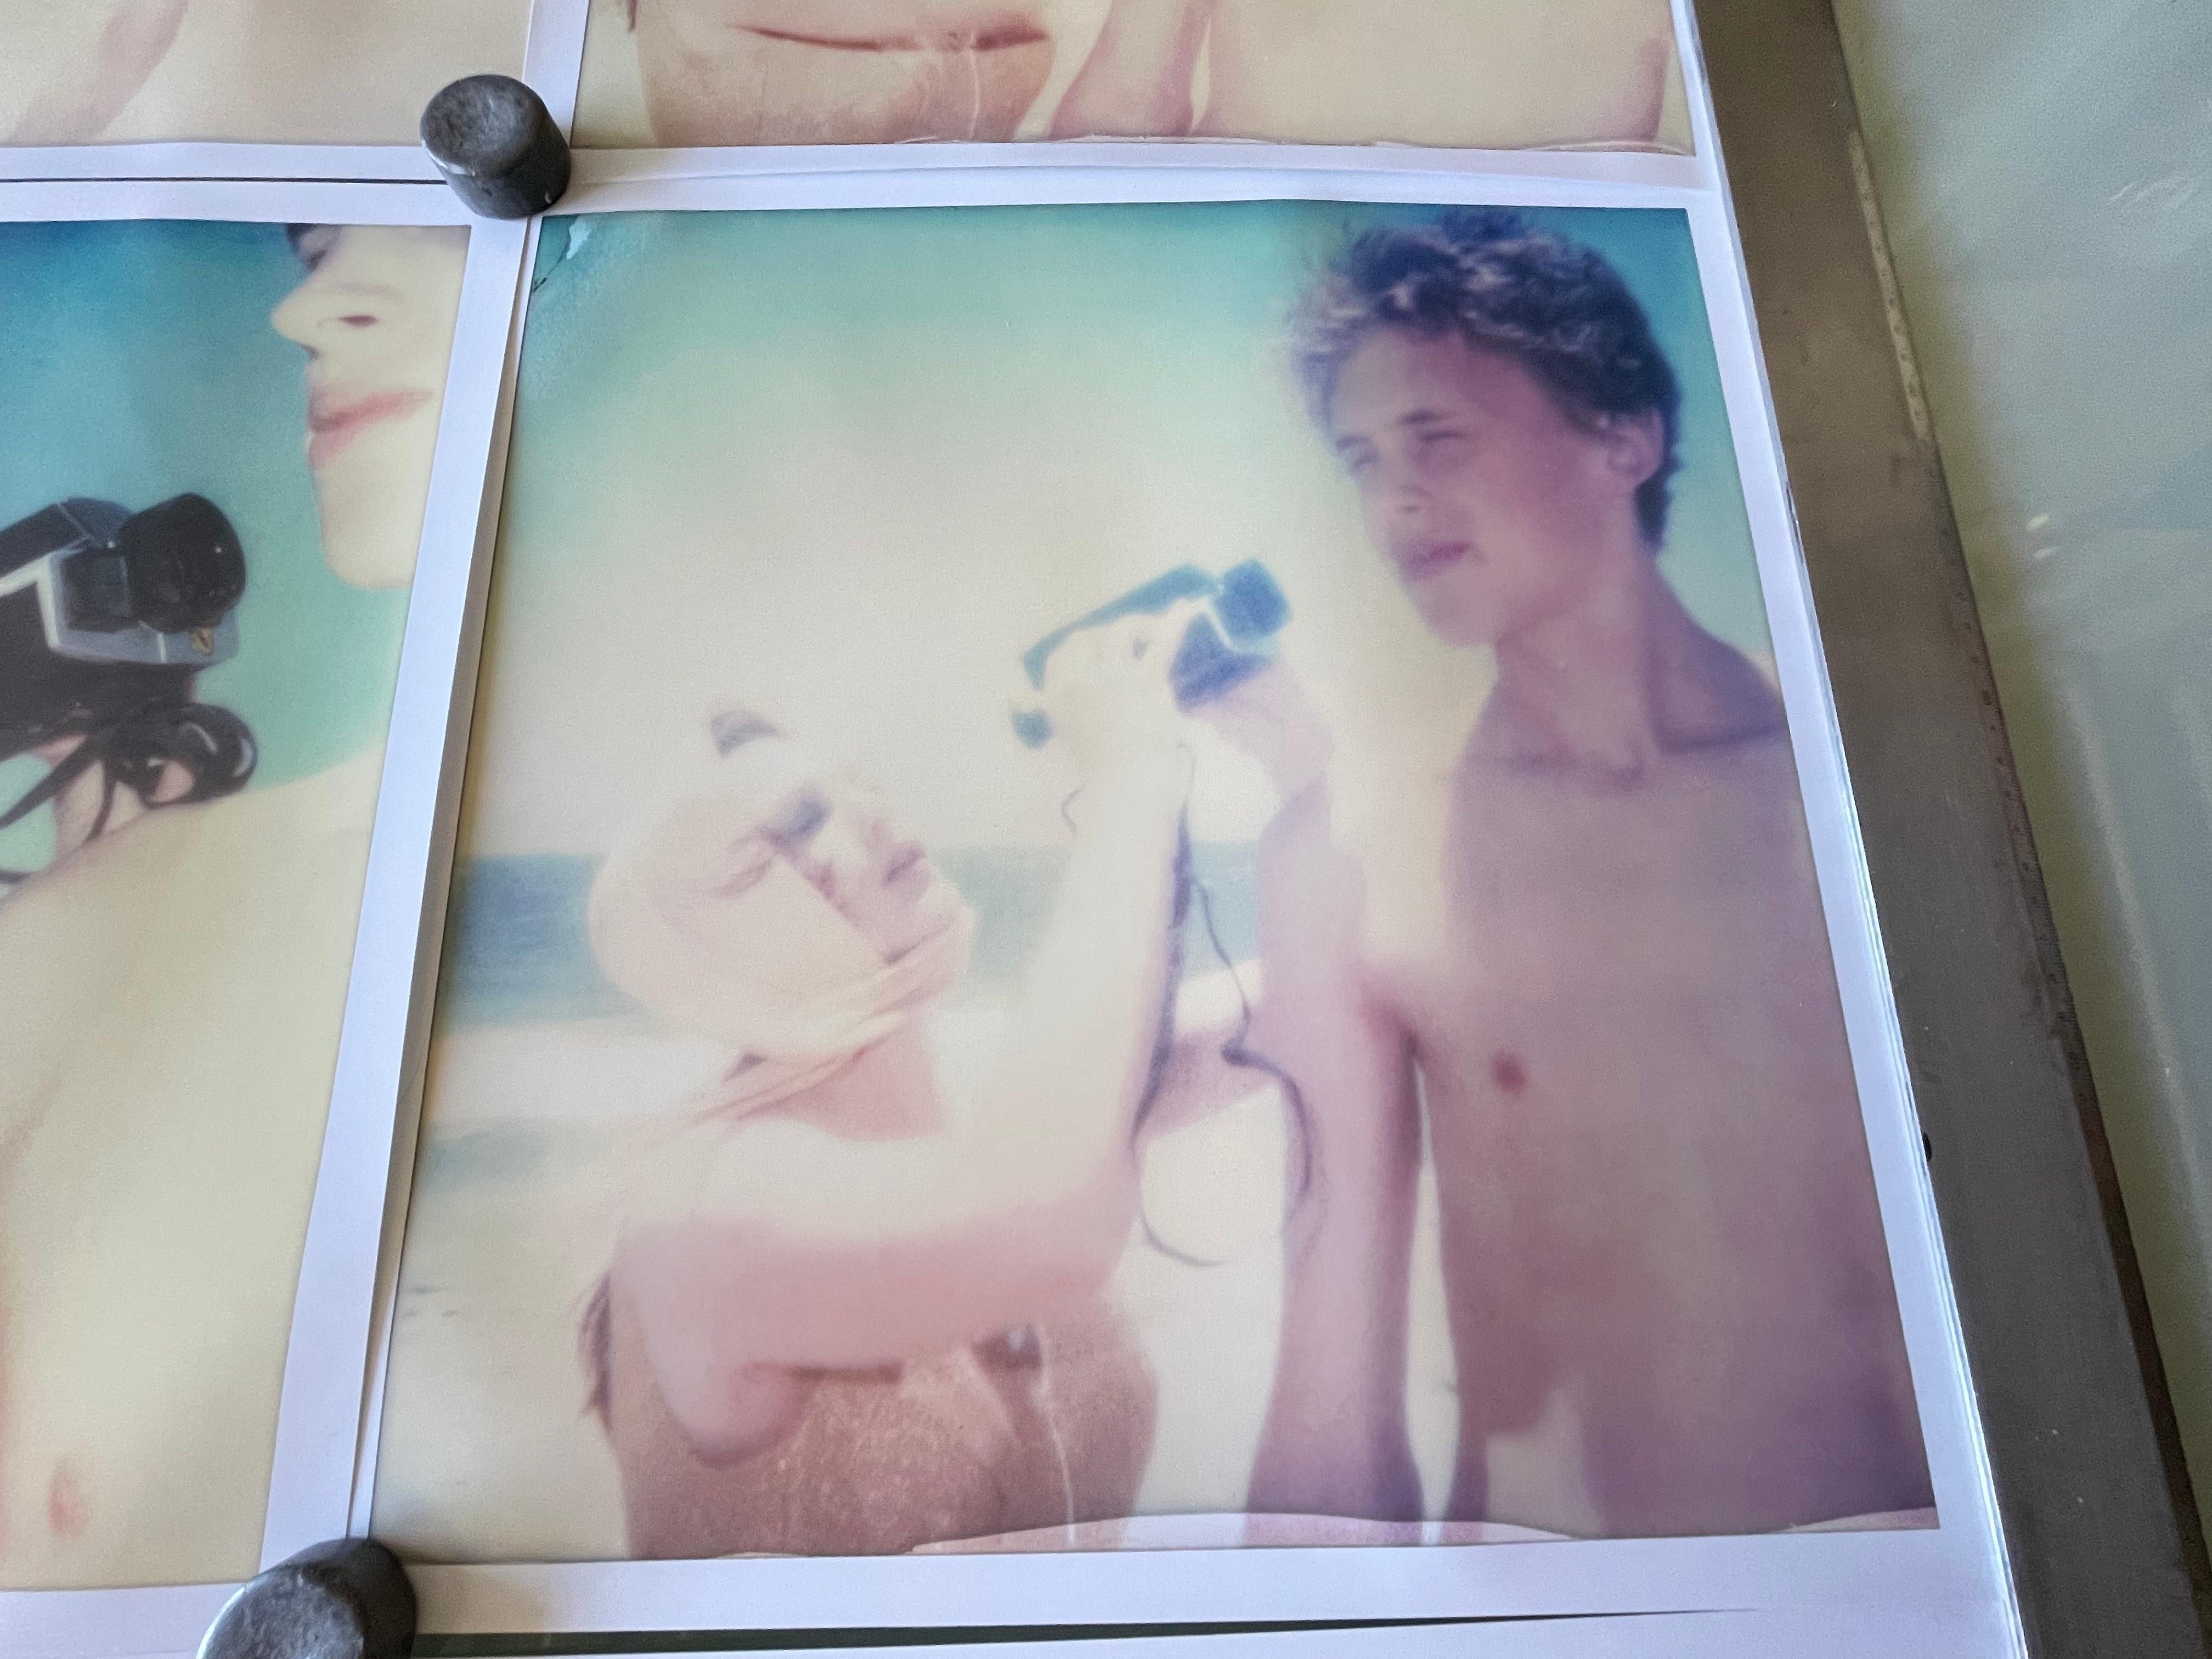 The Diva and the Boy (Beachshoot) - 9 pieces - Polaroid, Vintage, Contemporary For Sale 6